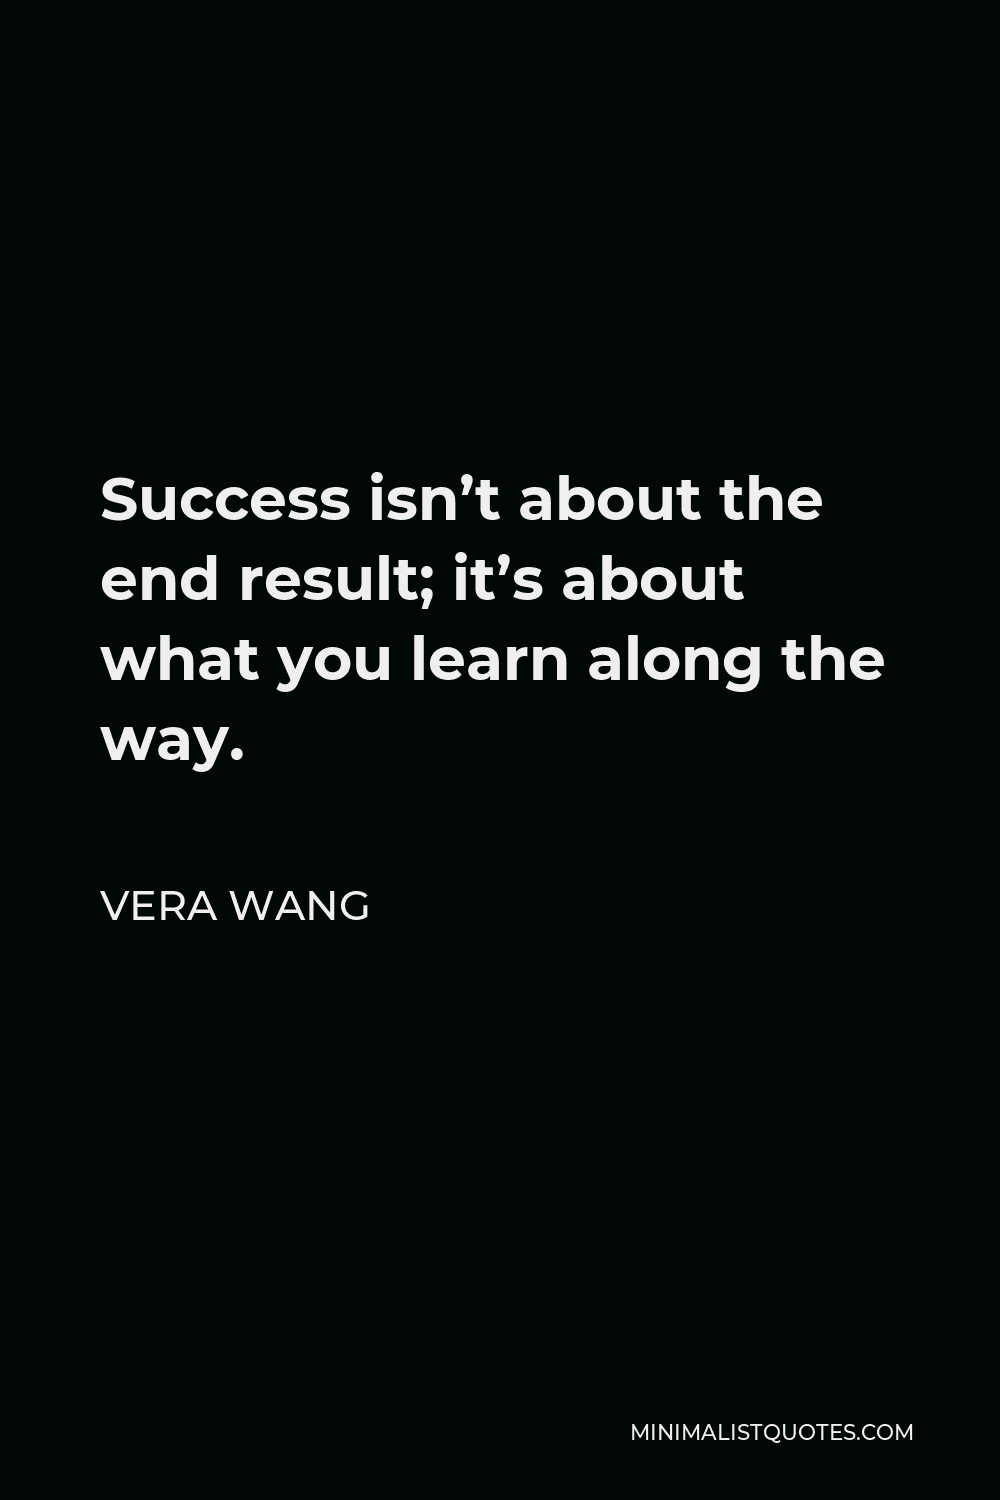 Vera Wang Quote - Success isn’t about the end result; it’s about what you learn along the way.